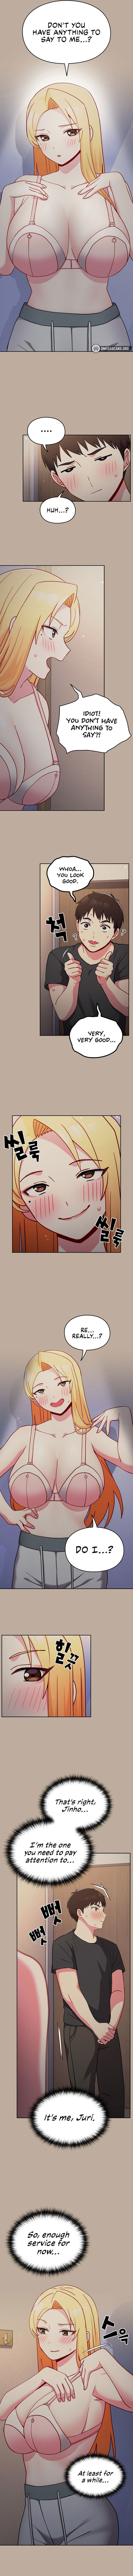 when-did-we-start-dating-chap-31-6